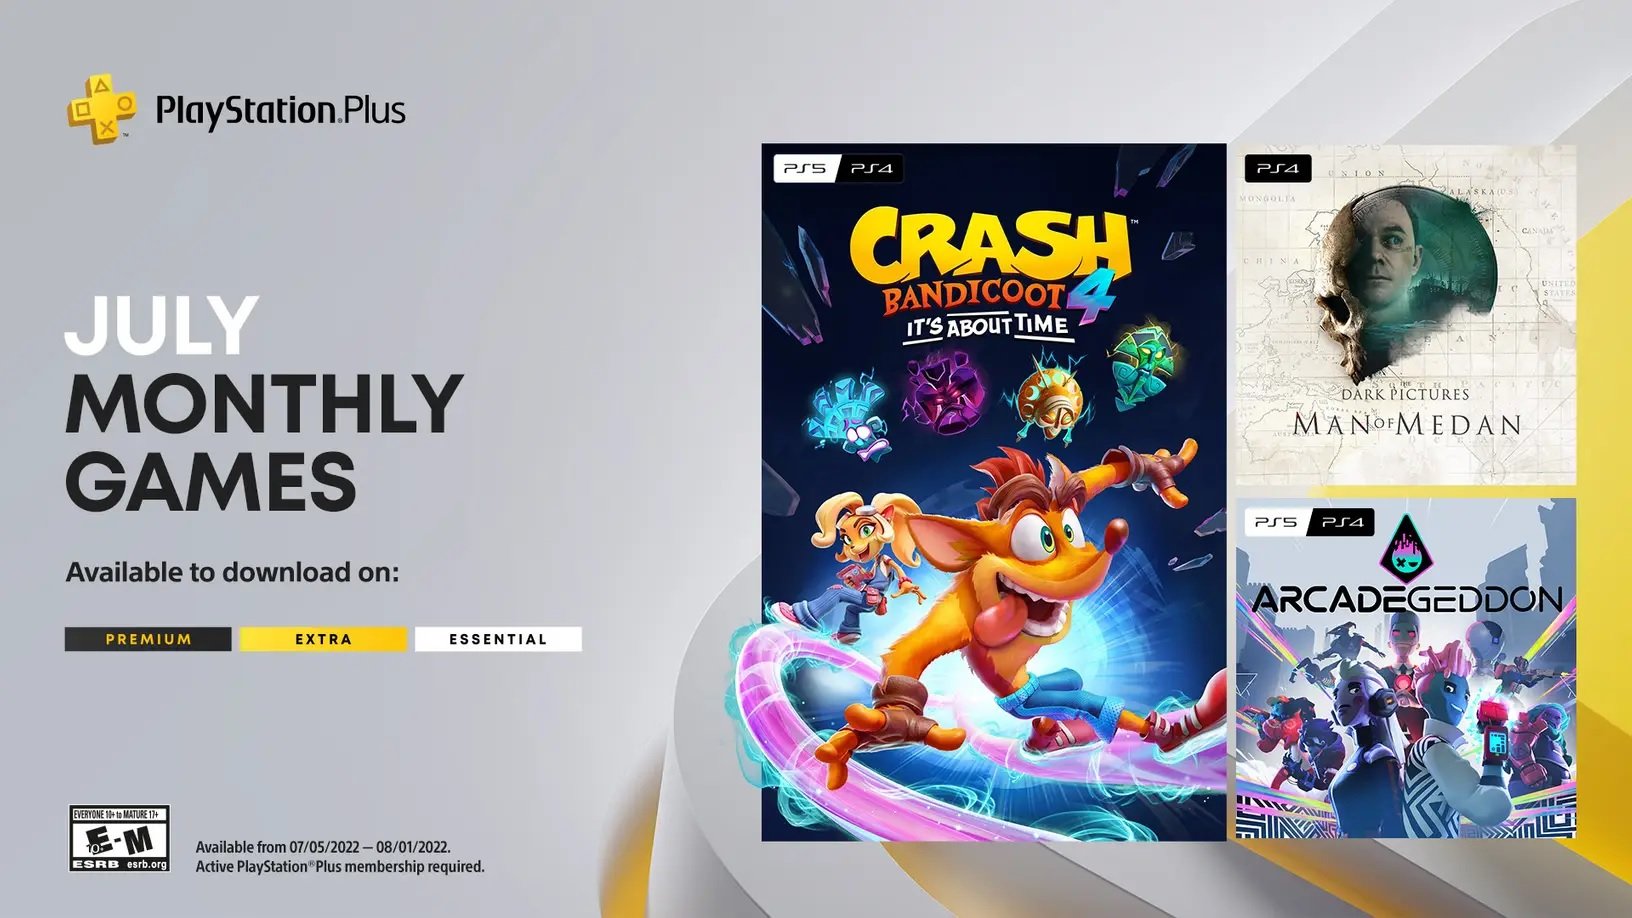 July’s PlayStation Plus games have officially been confirmed by Sony VGC